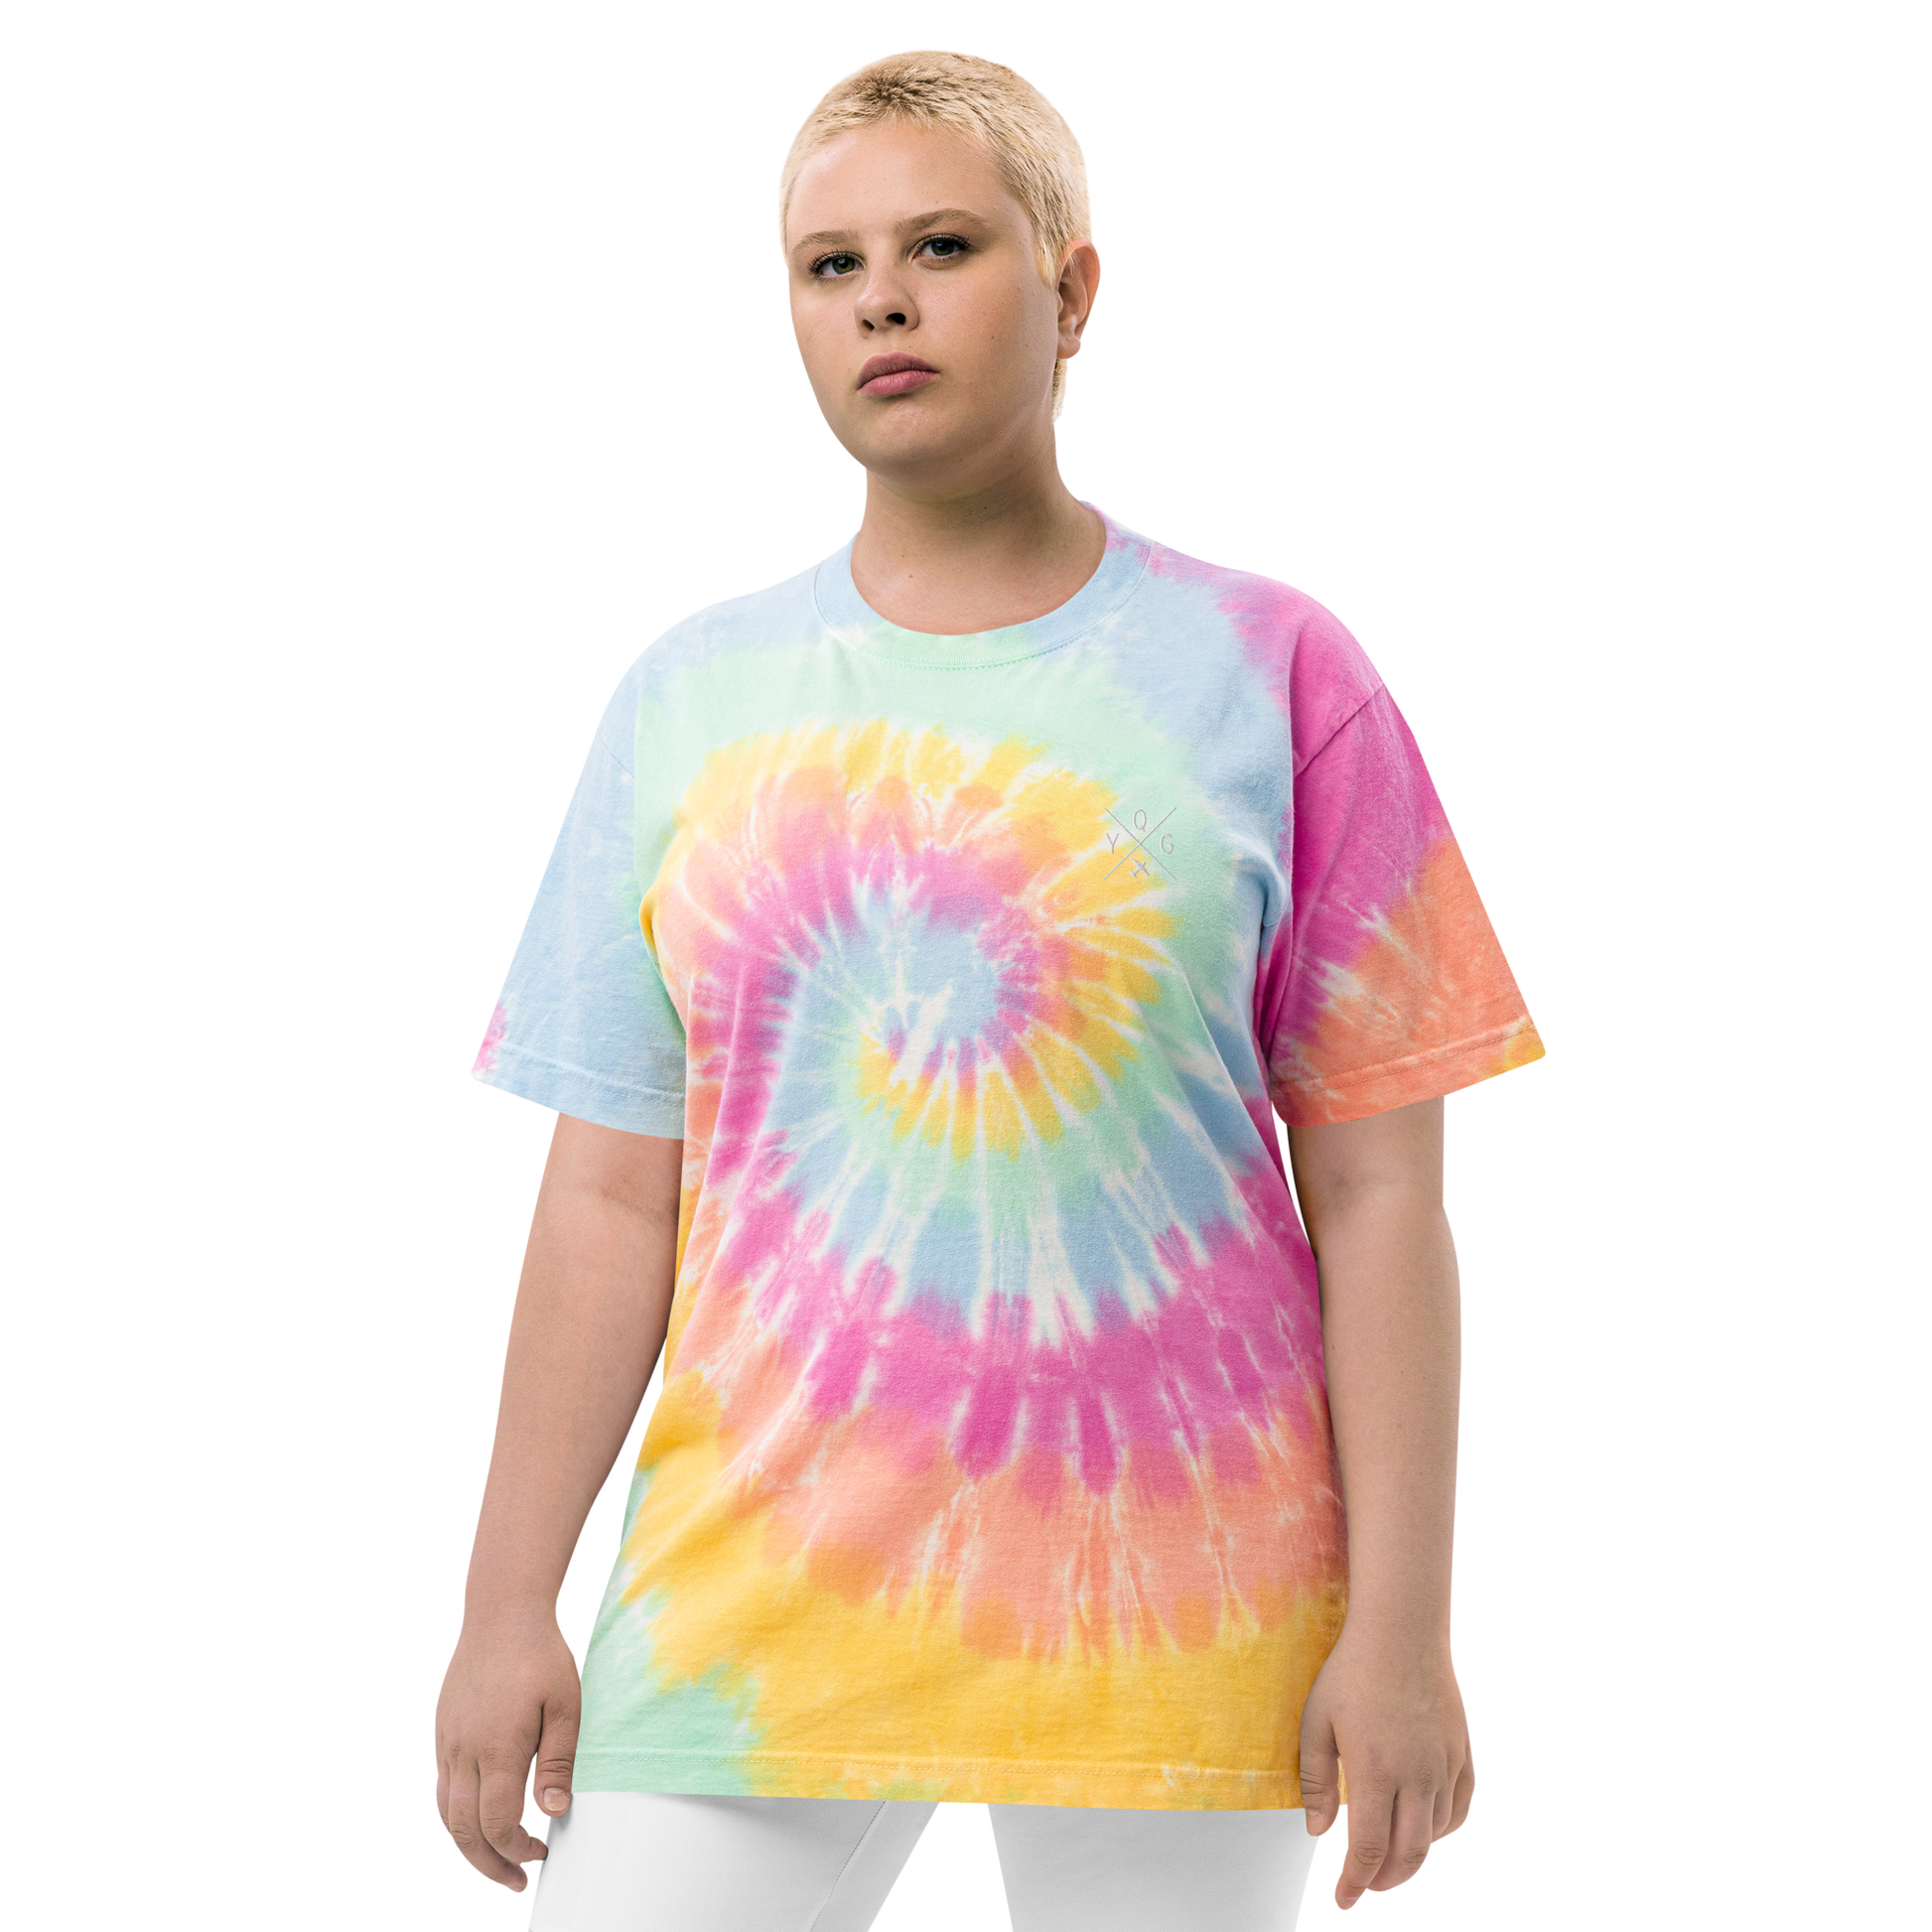 YHM Designs - YQG Windsor Oversized Tie-Dye T-Shirt - Crossed-X Design with Airport Code and Vintage Propliner - White Embroidery - Image 11